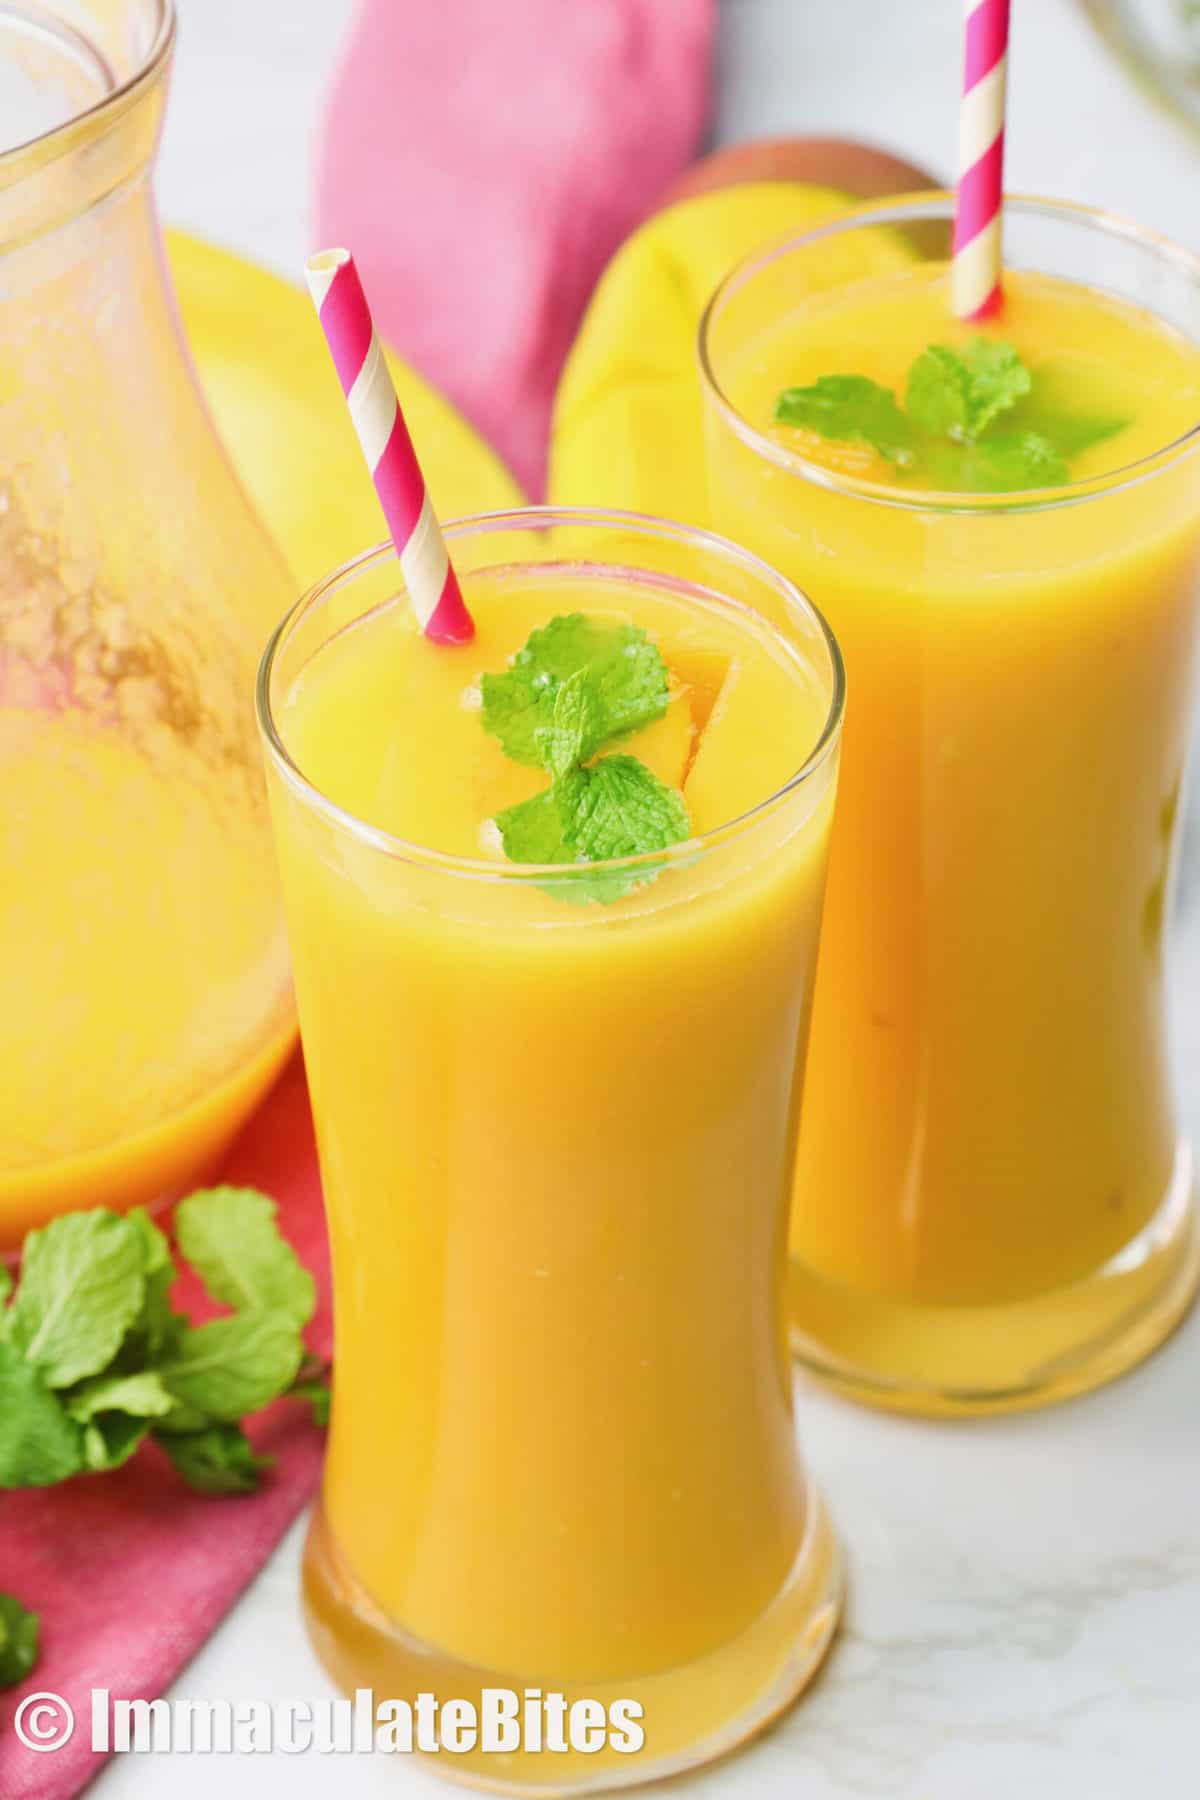 Two glasses of mango juice garnished with mint leaves